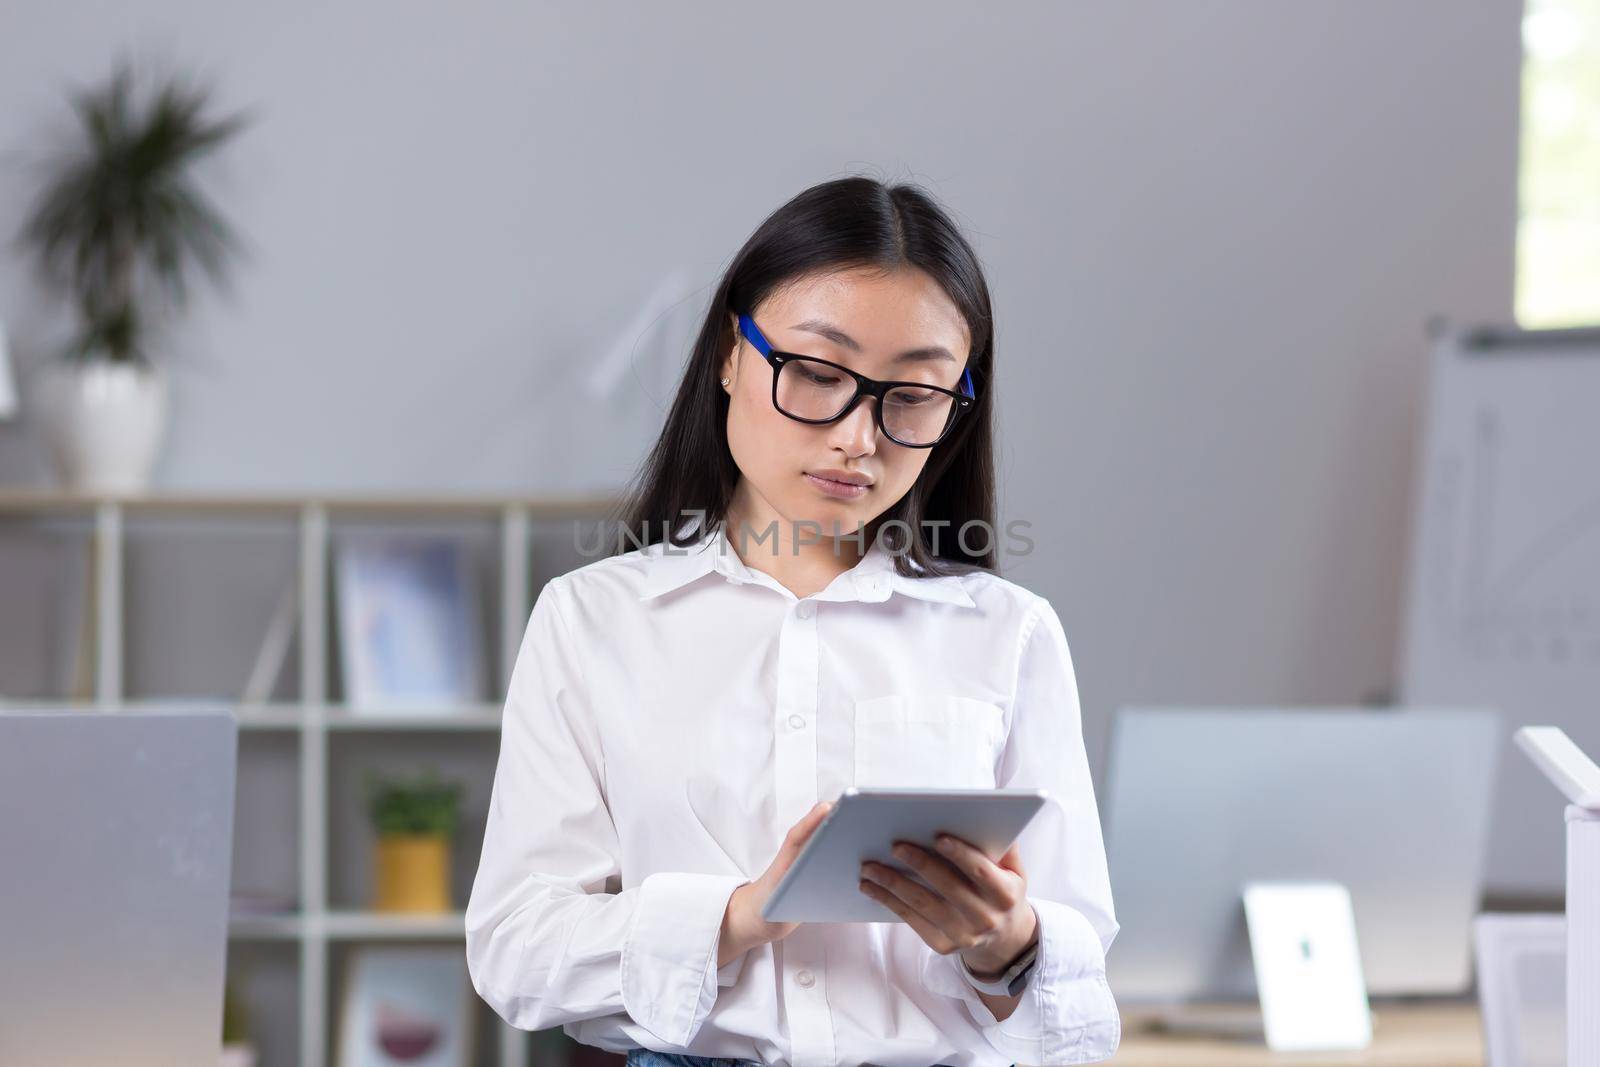 Young beautiful Asian teacher working with tablet, in classroom with computers at school, woman in white shirt and glasses reads from tablet